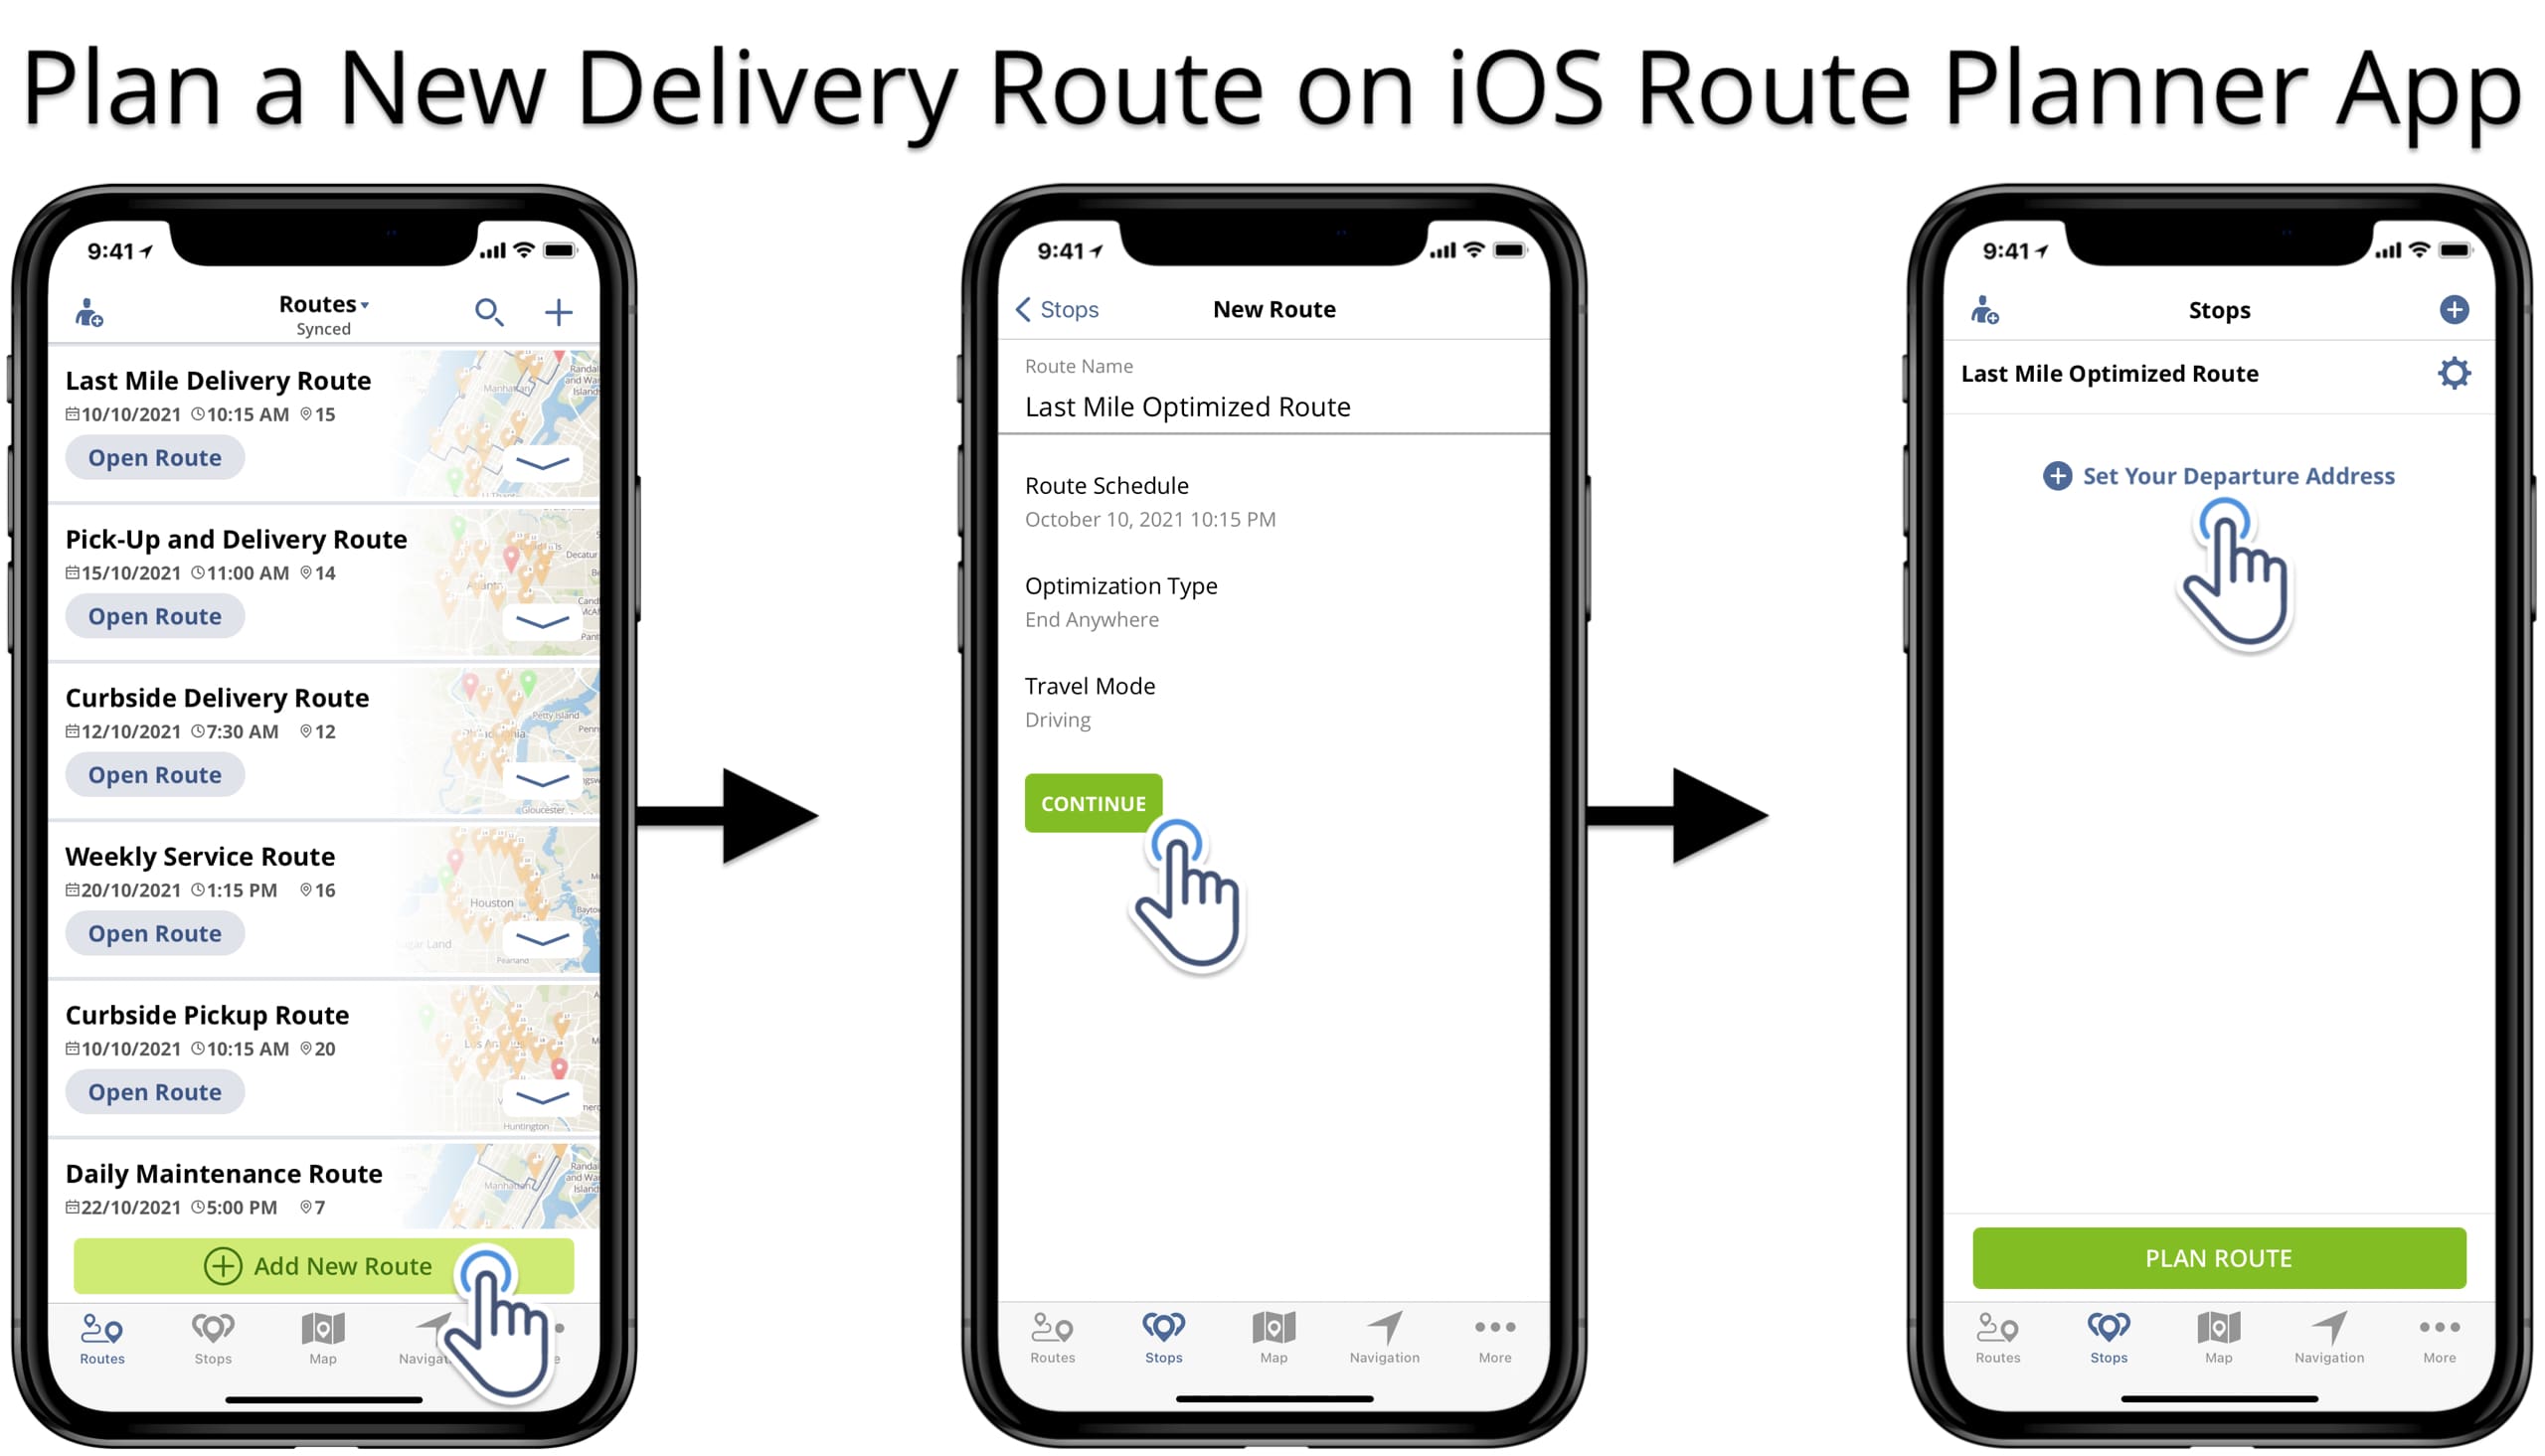 Plan a delivery route from a CSV or XLSX file on the iOS route planner app for iPhone or iPad.